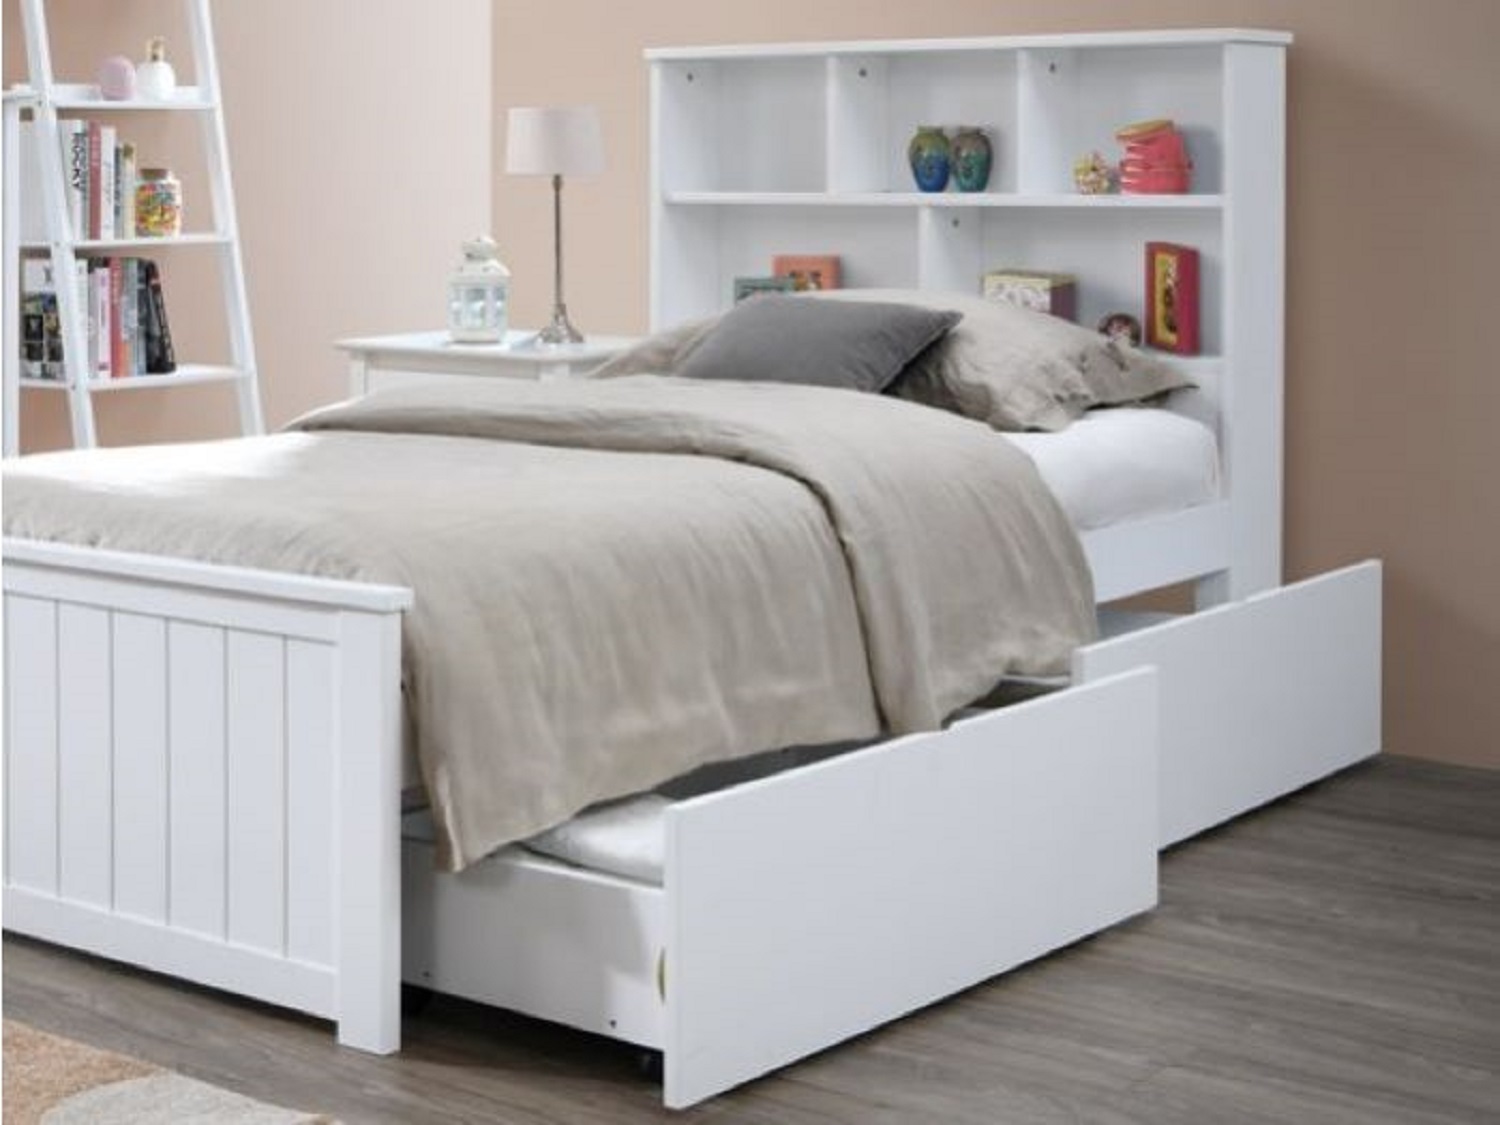 White Single bed with Pullout Draws